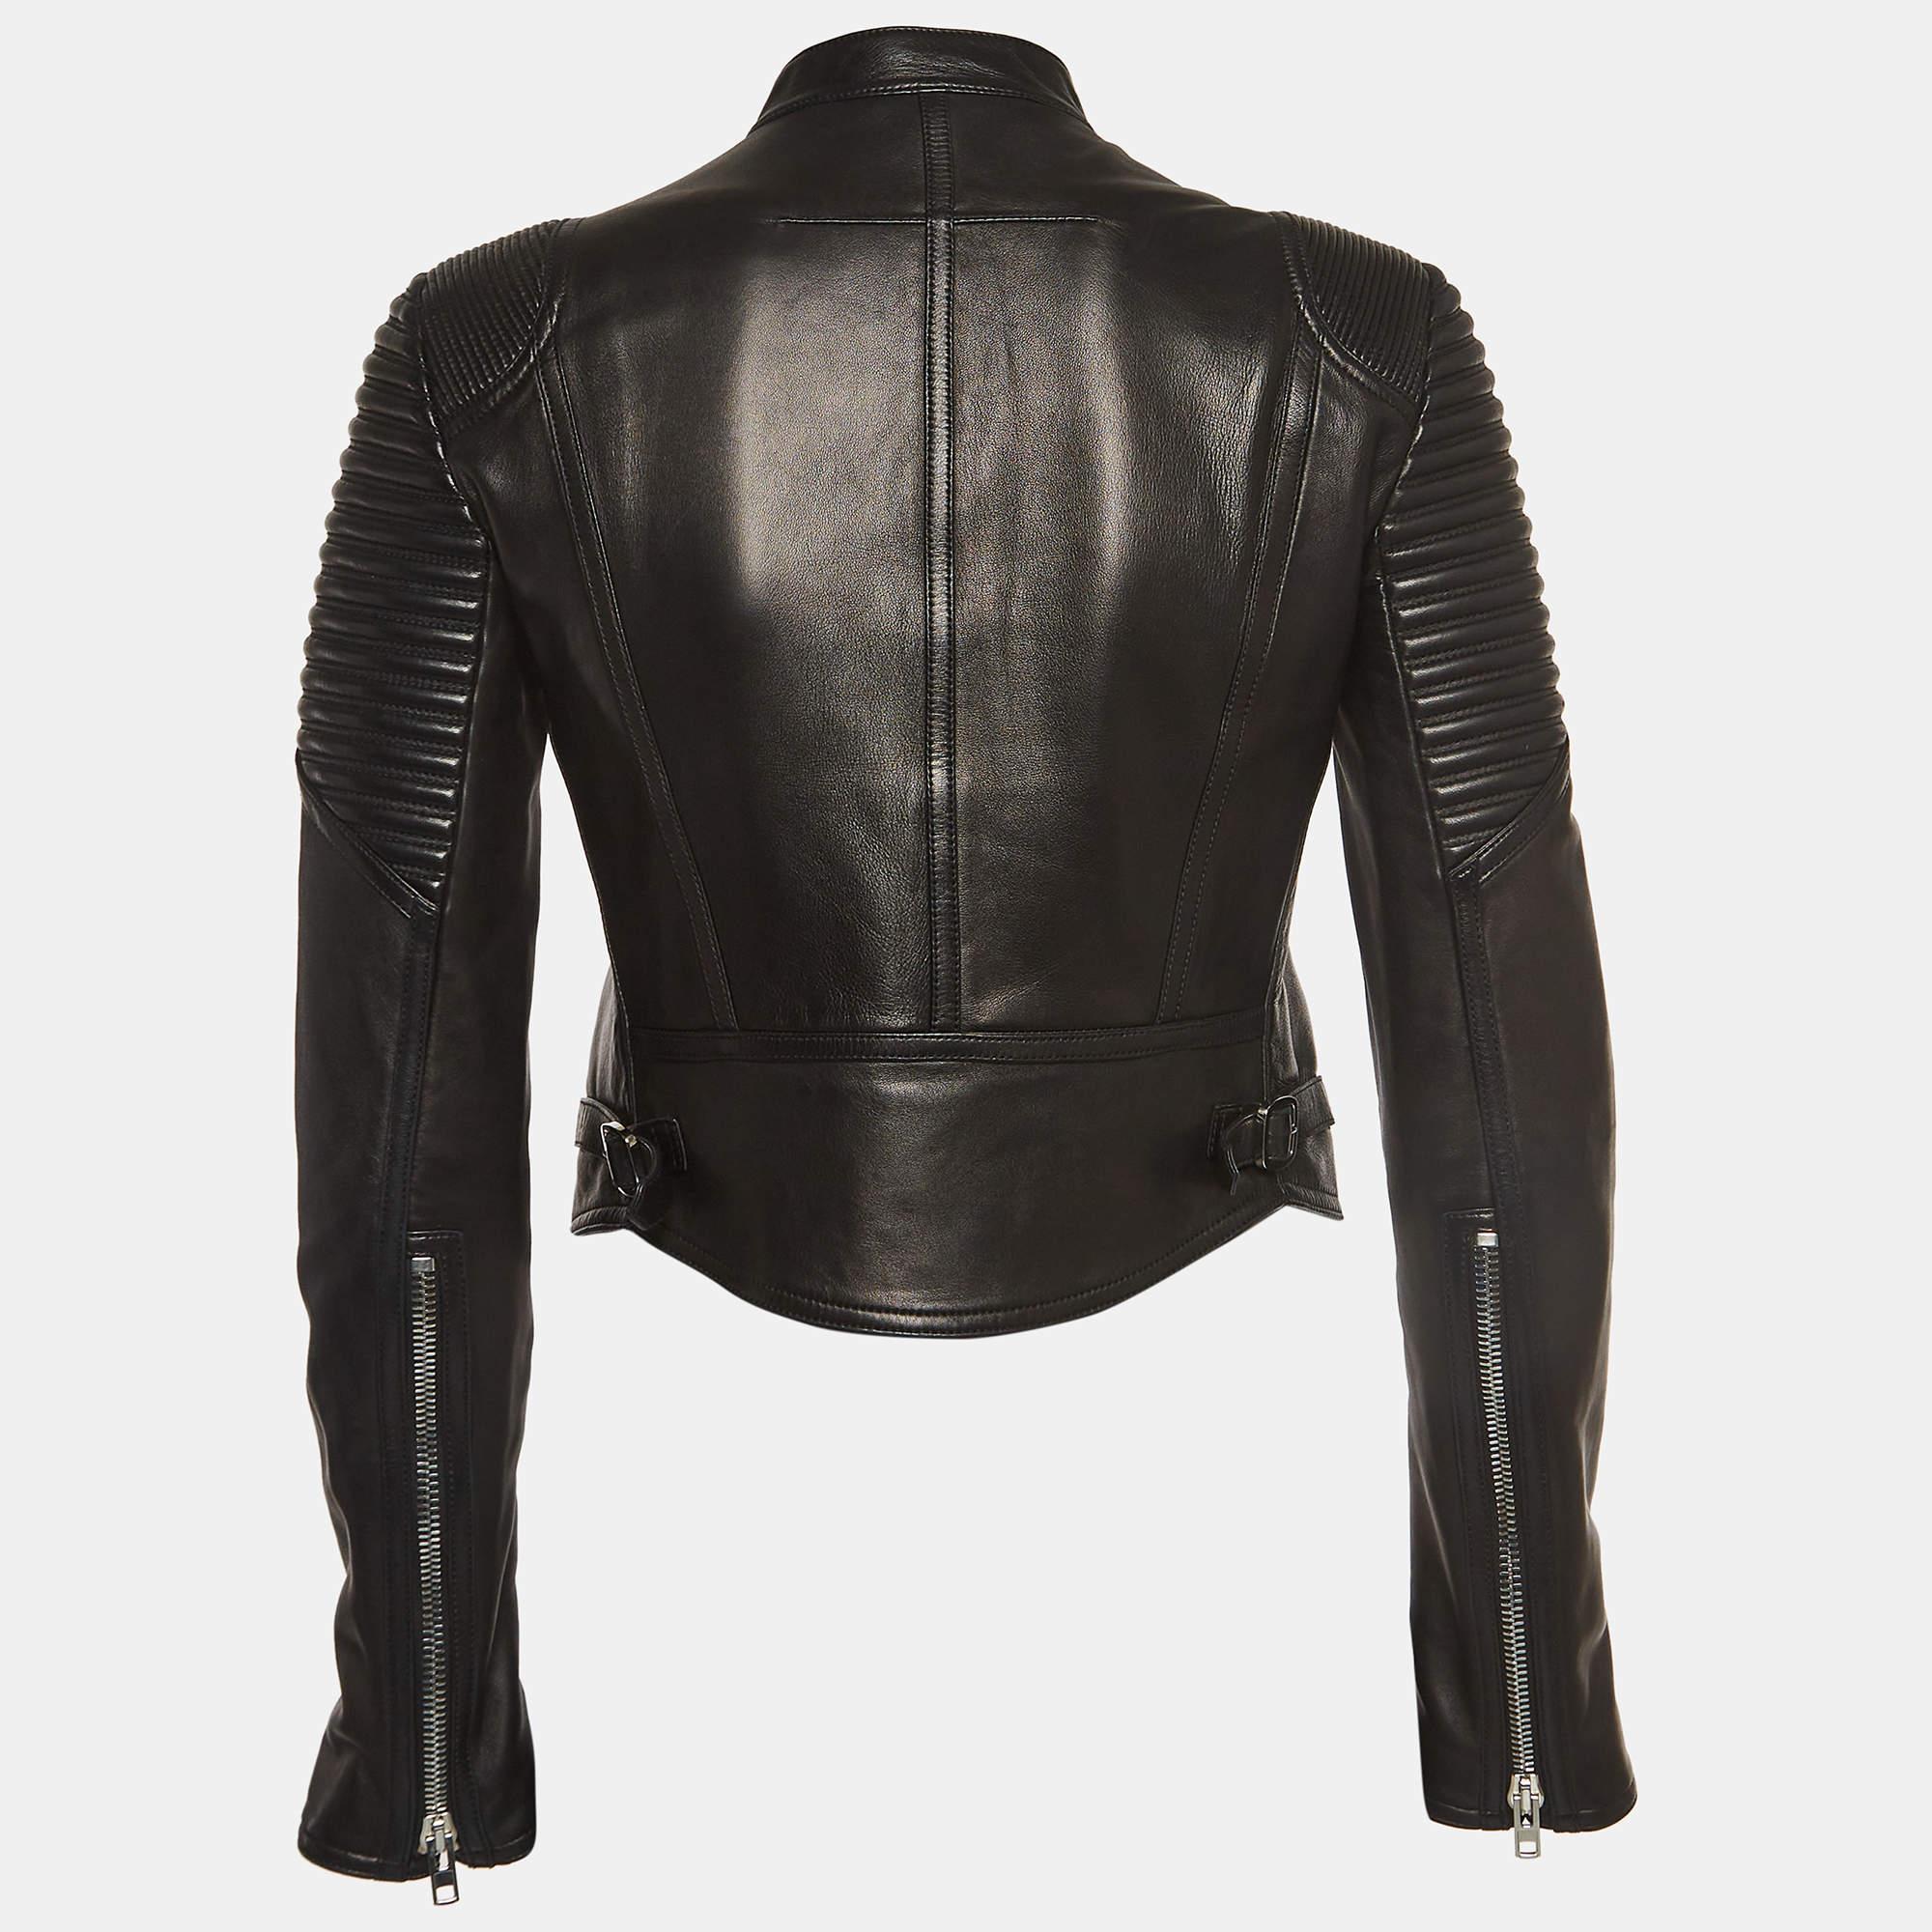 The biker jacket is the epitome of edgy sophistication. Crafted from high-quality lambskin leather, this piece features a sleek, tailored silhouette with zip detailing. Its rebellious charm and timeless appeal make it a must-have addition to any